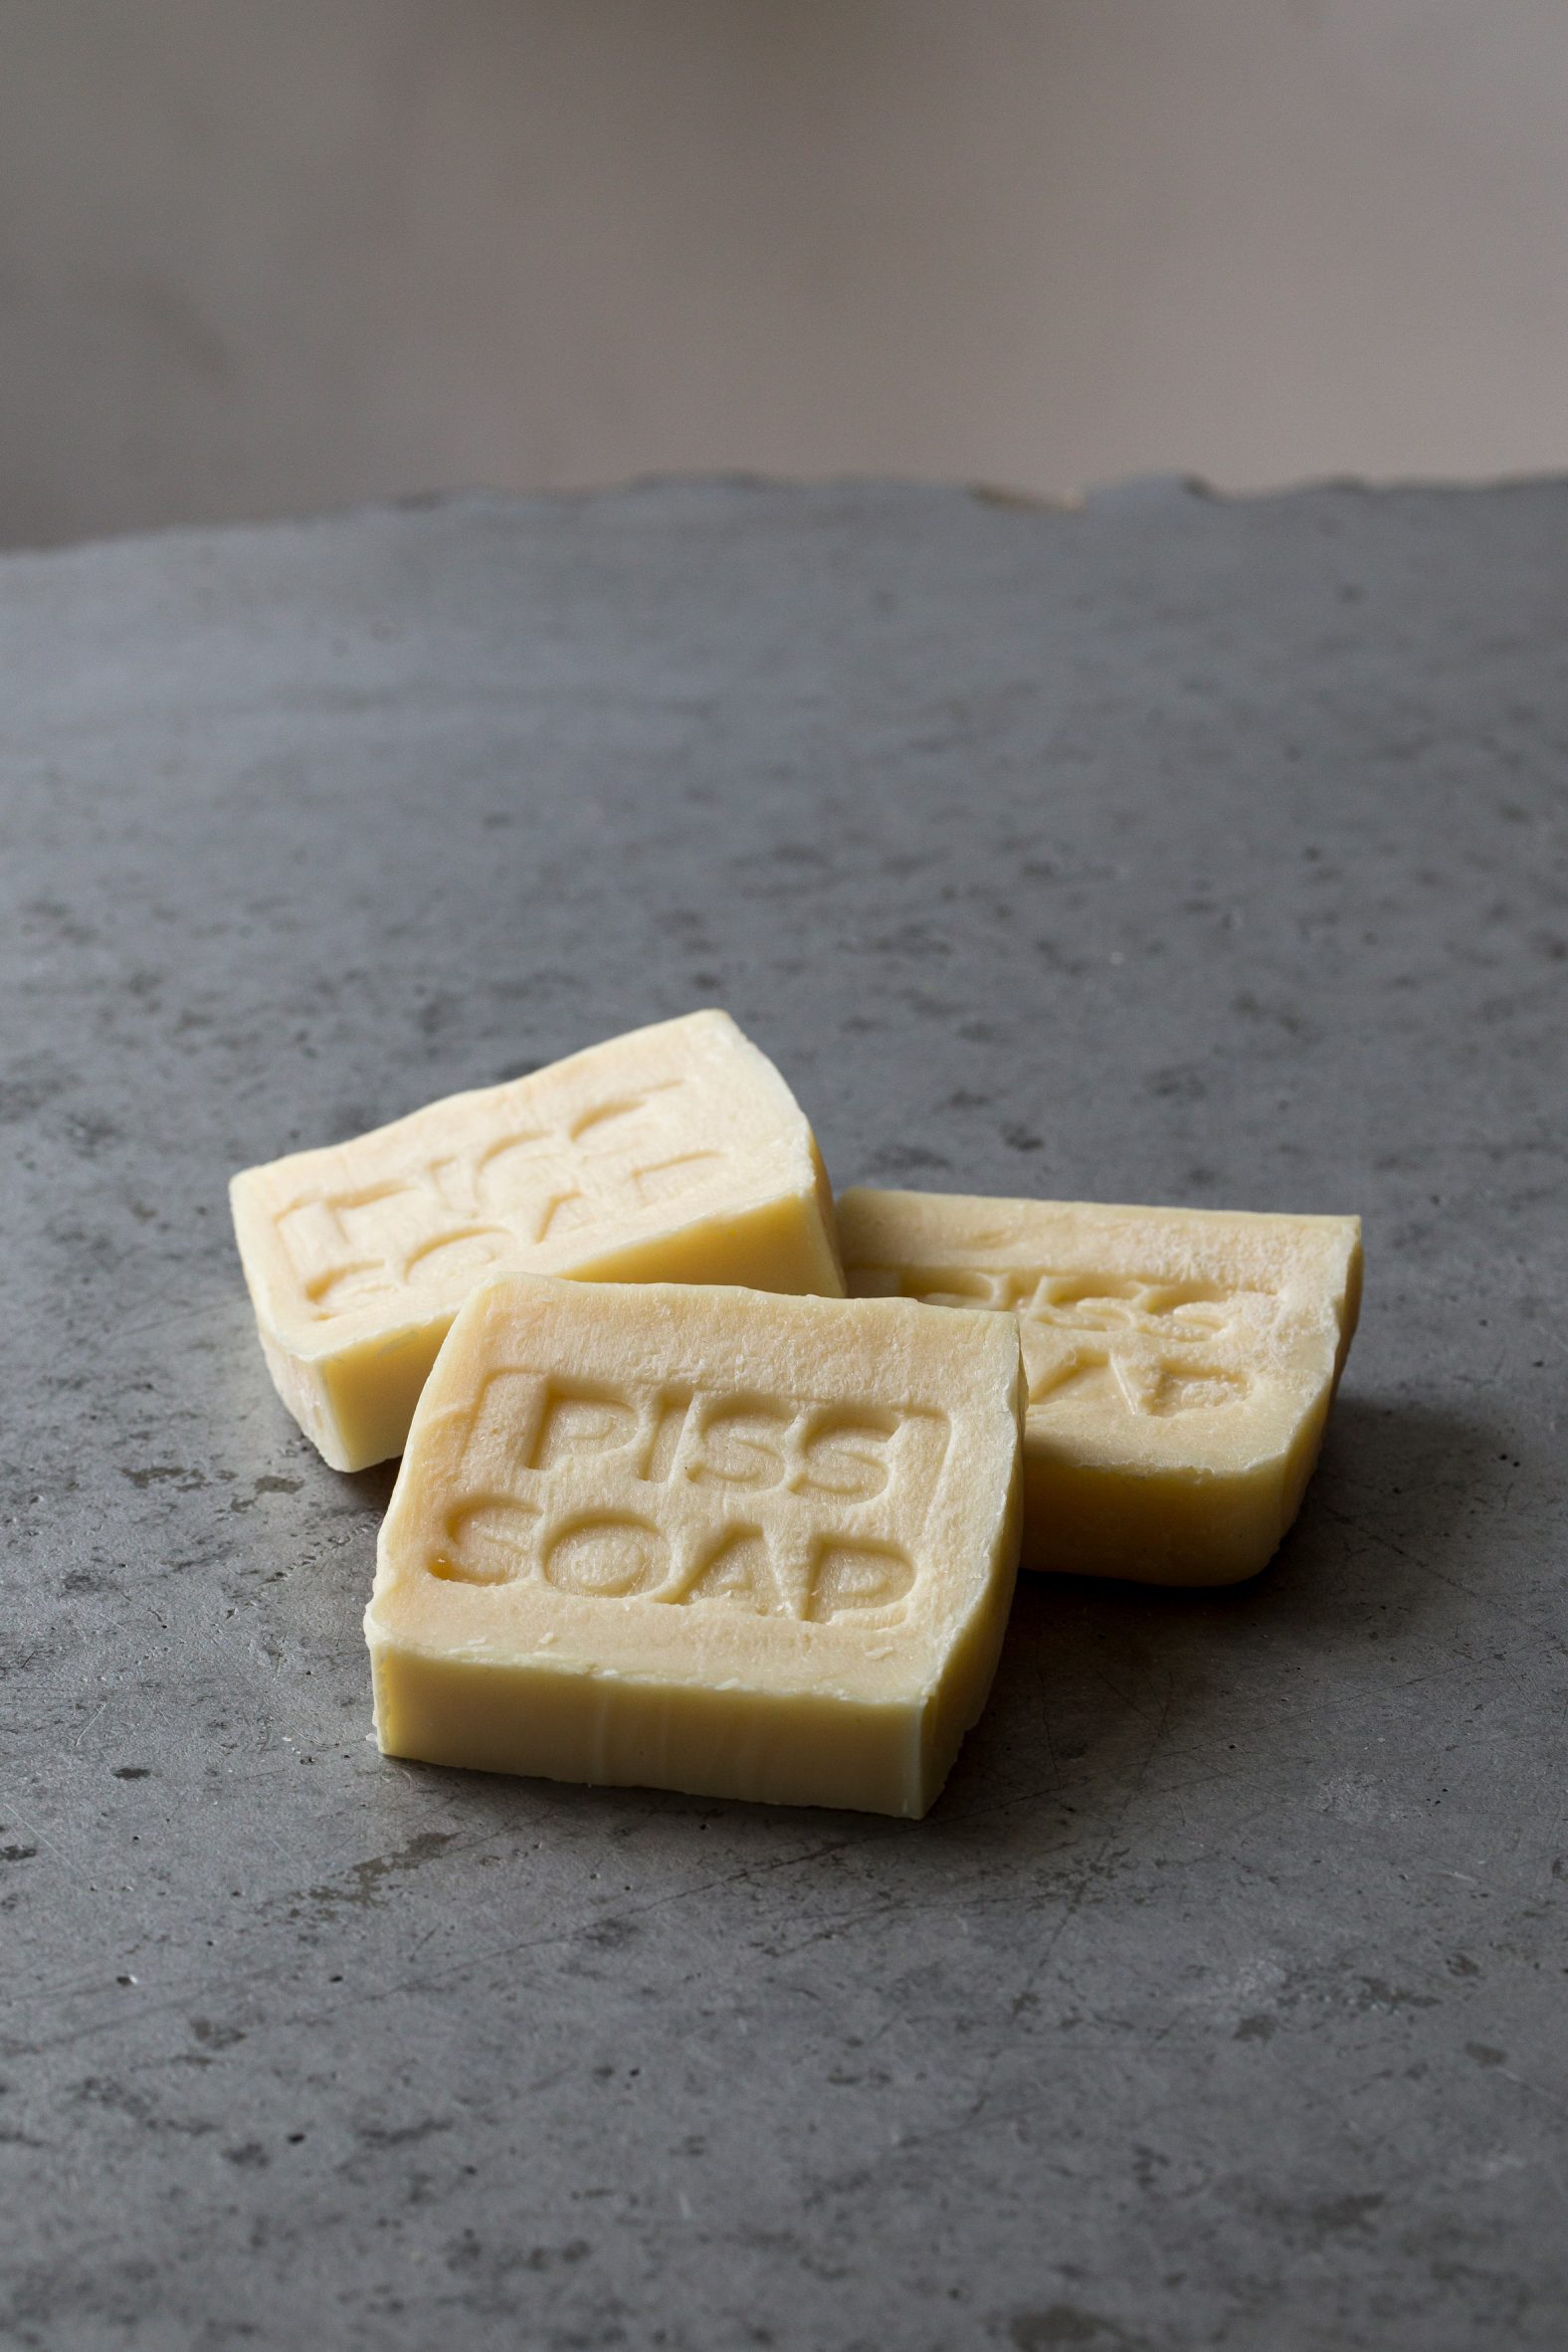 Bar of Piss Soap by Arthur Guilleminot at New Store pop-up